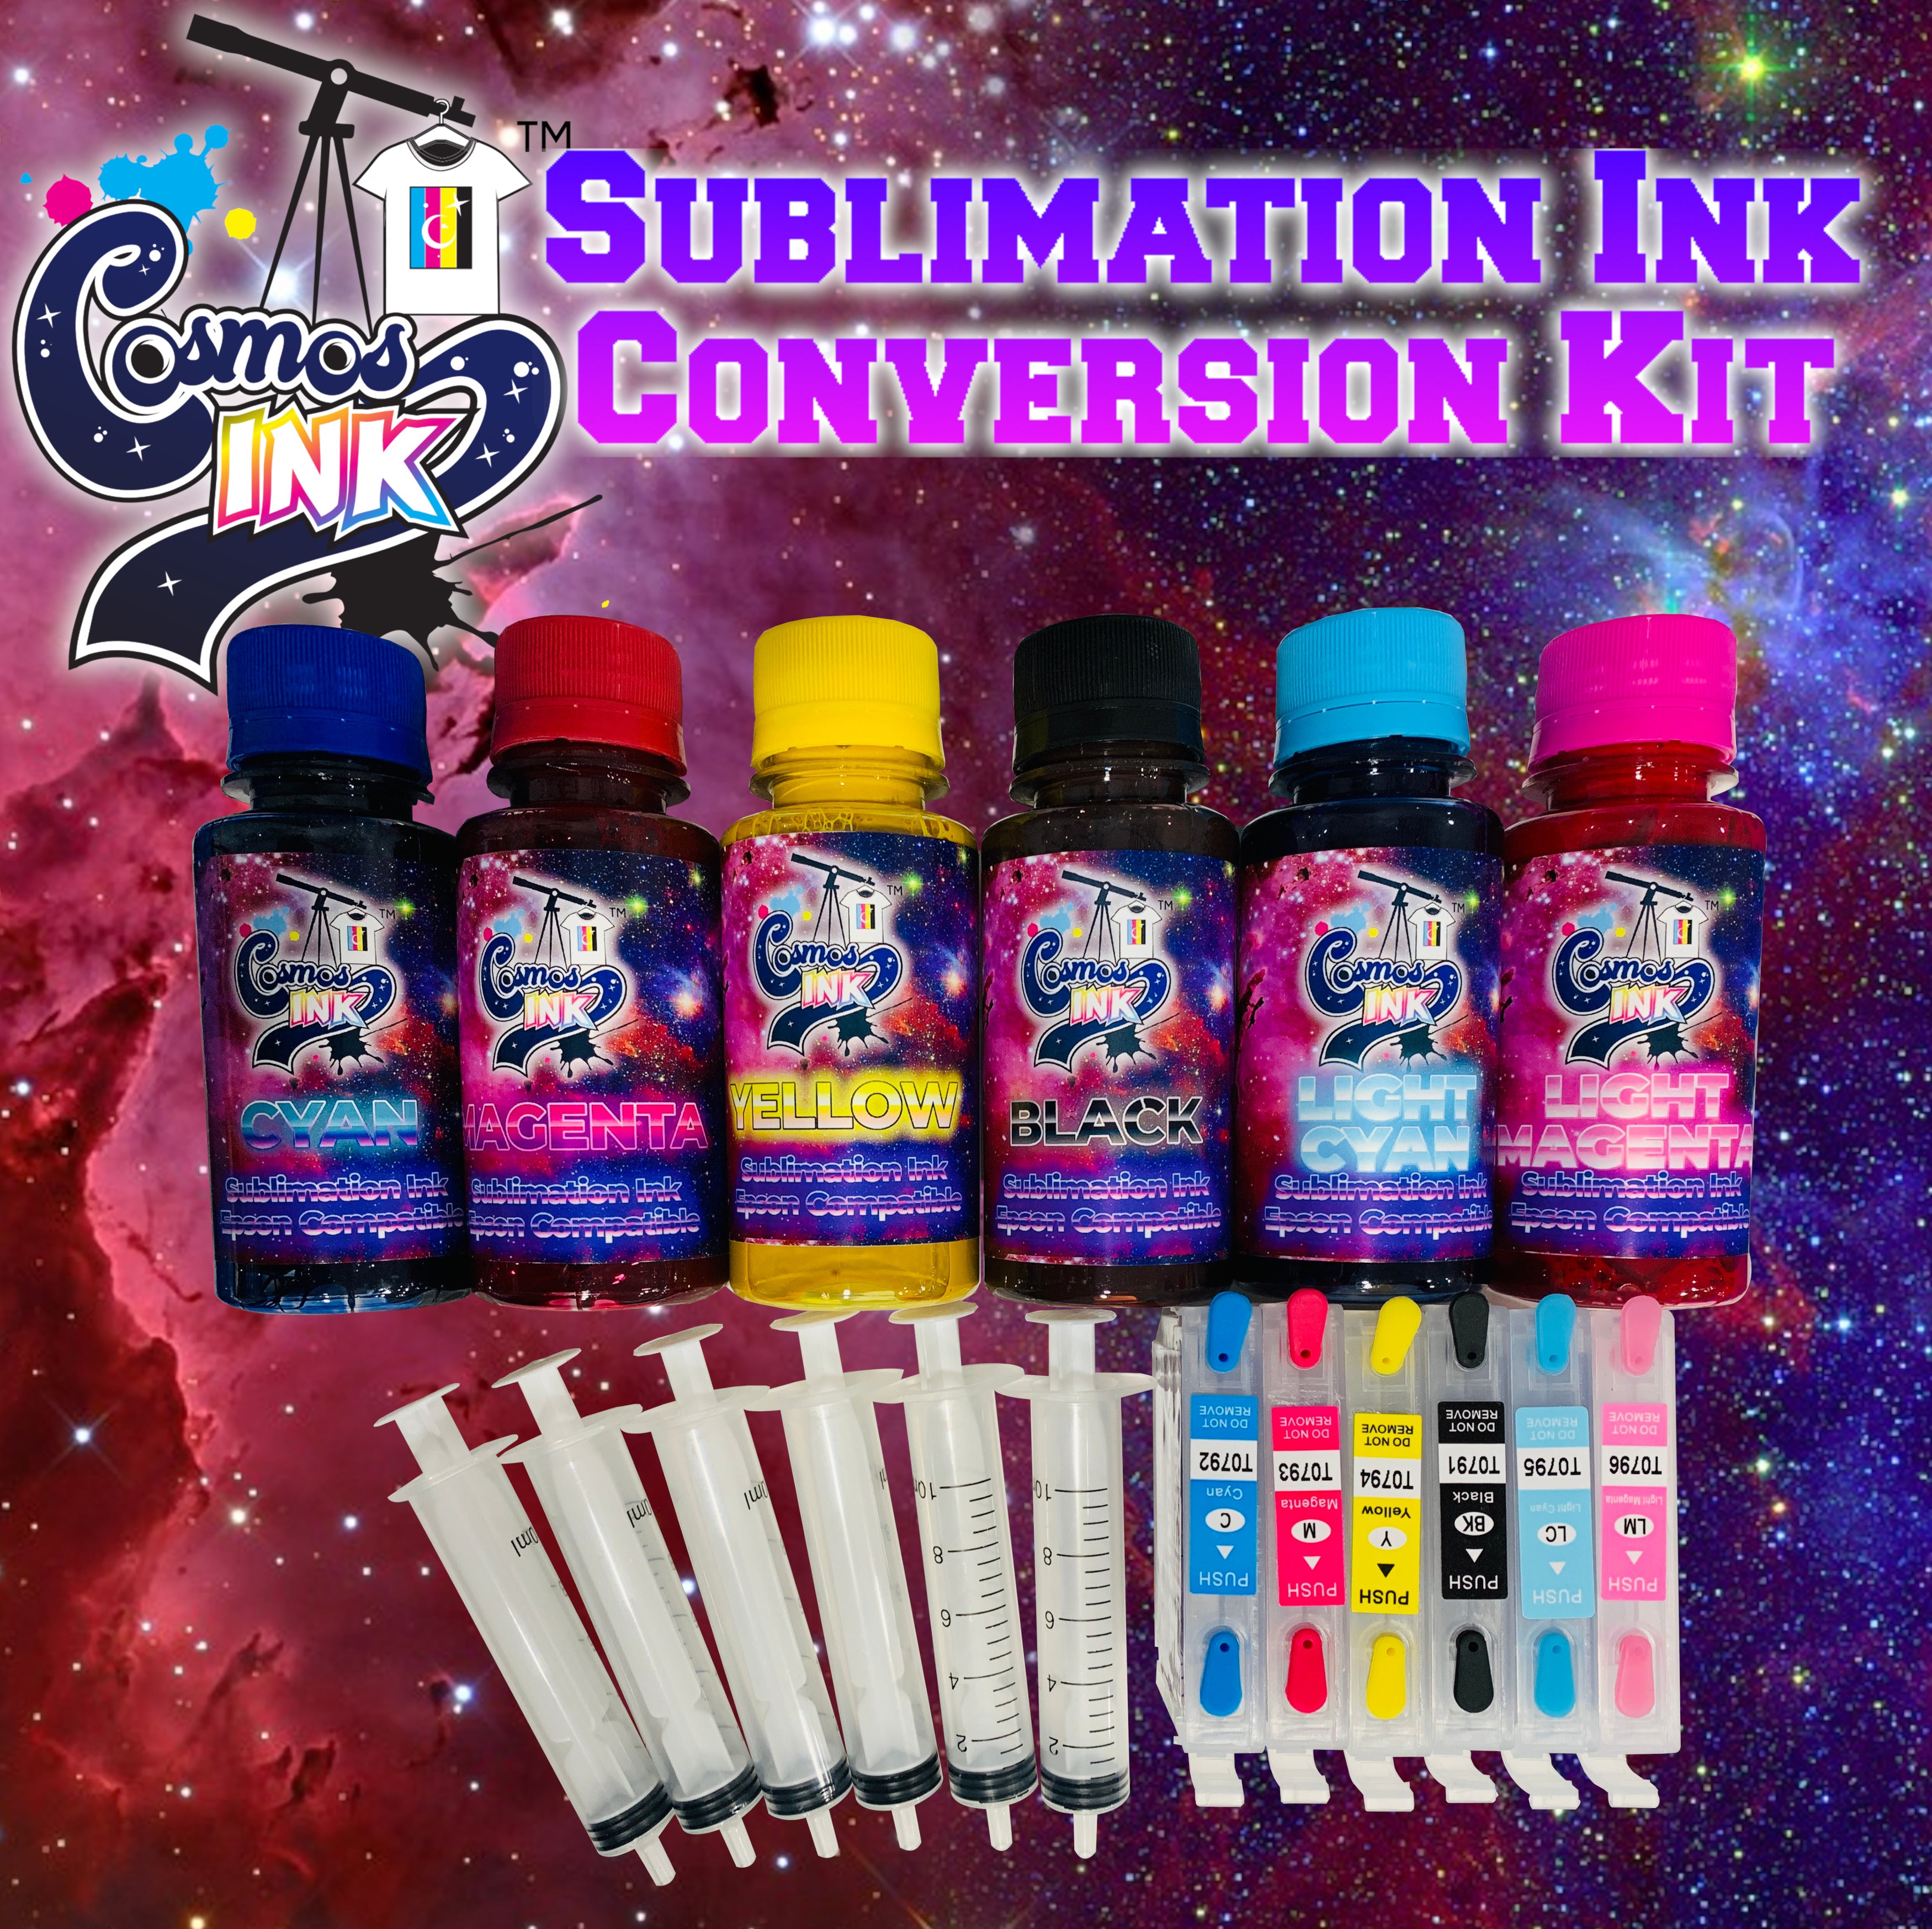 Sublimation Ink Conversion Kit for Epson Artisan 1430 and Stylus 1400  Printers